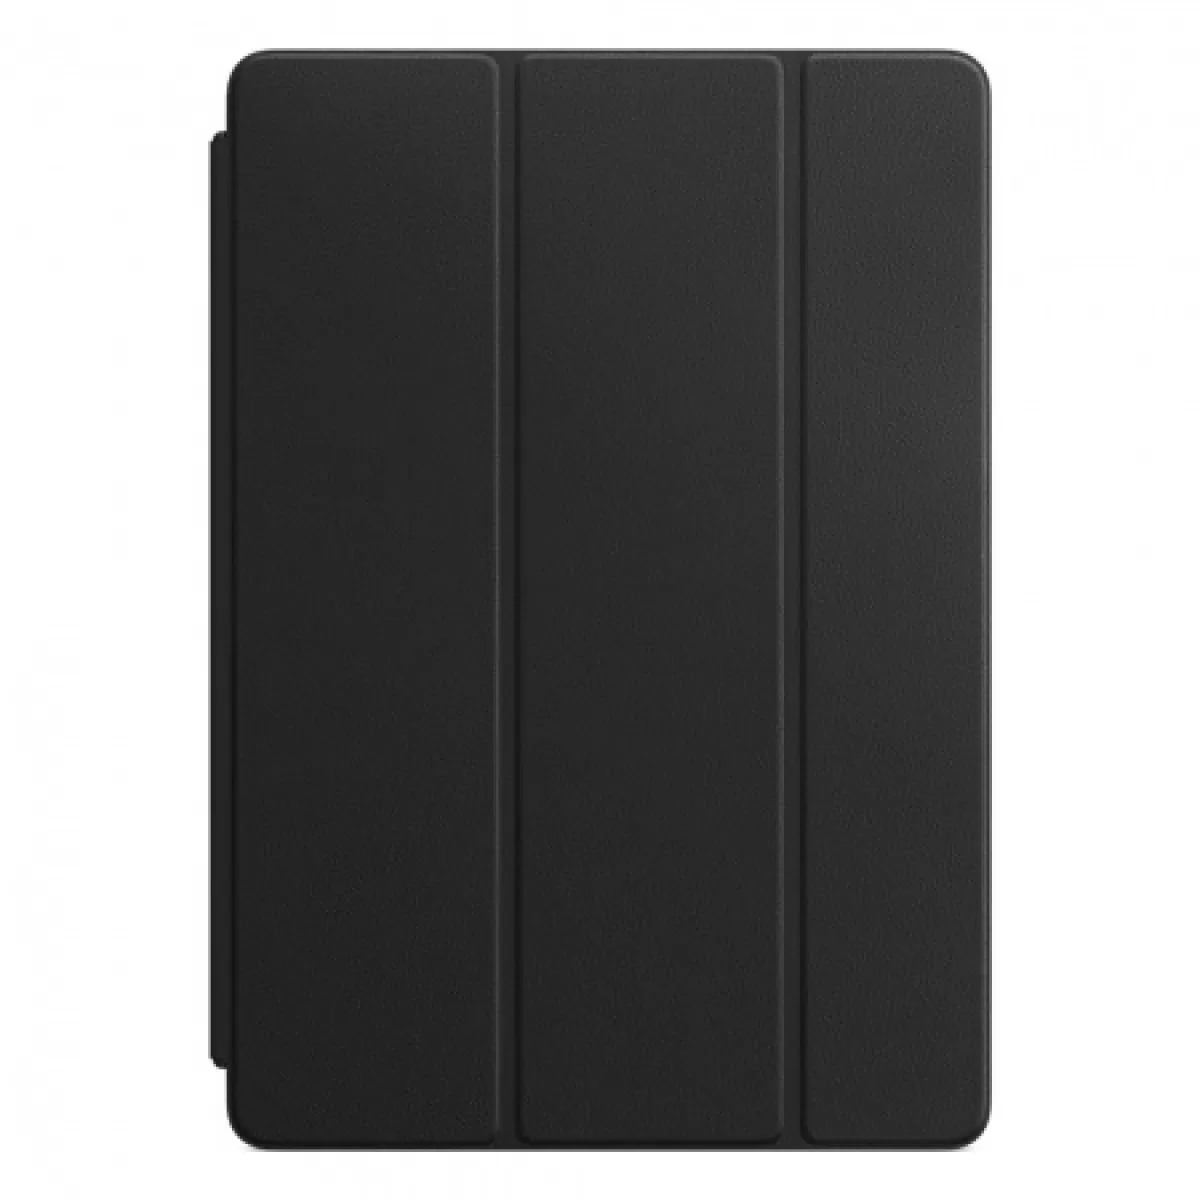 Apple Leather Smart Cover for 10.5inch iPad Pro Black